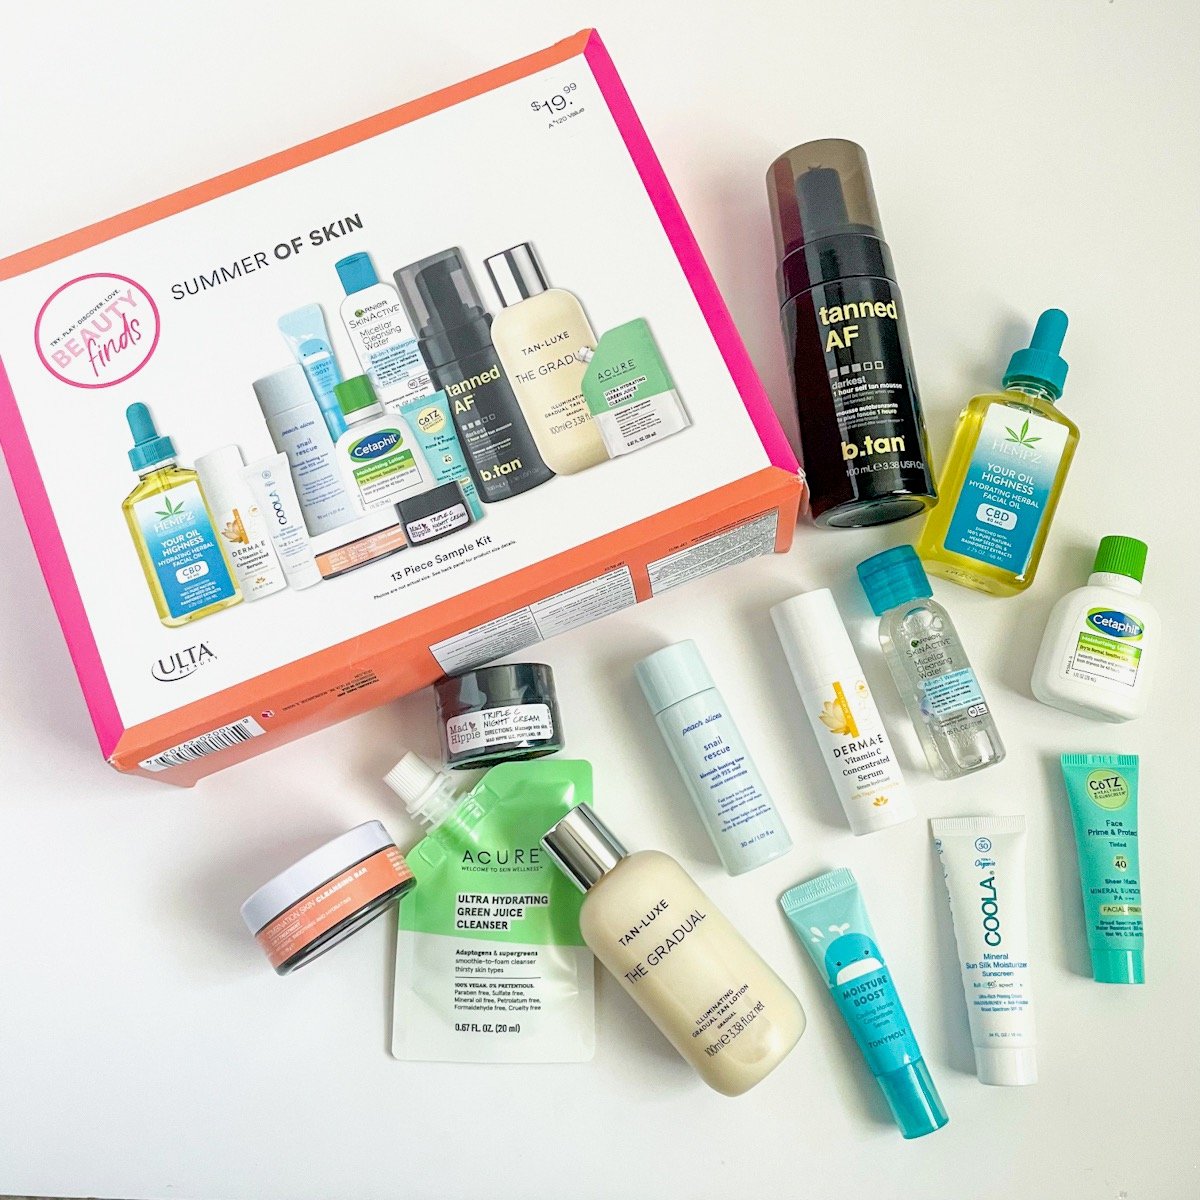 Ulta Beauty Summer of Skin Limited Edition Kit Review